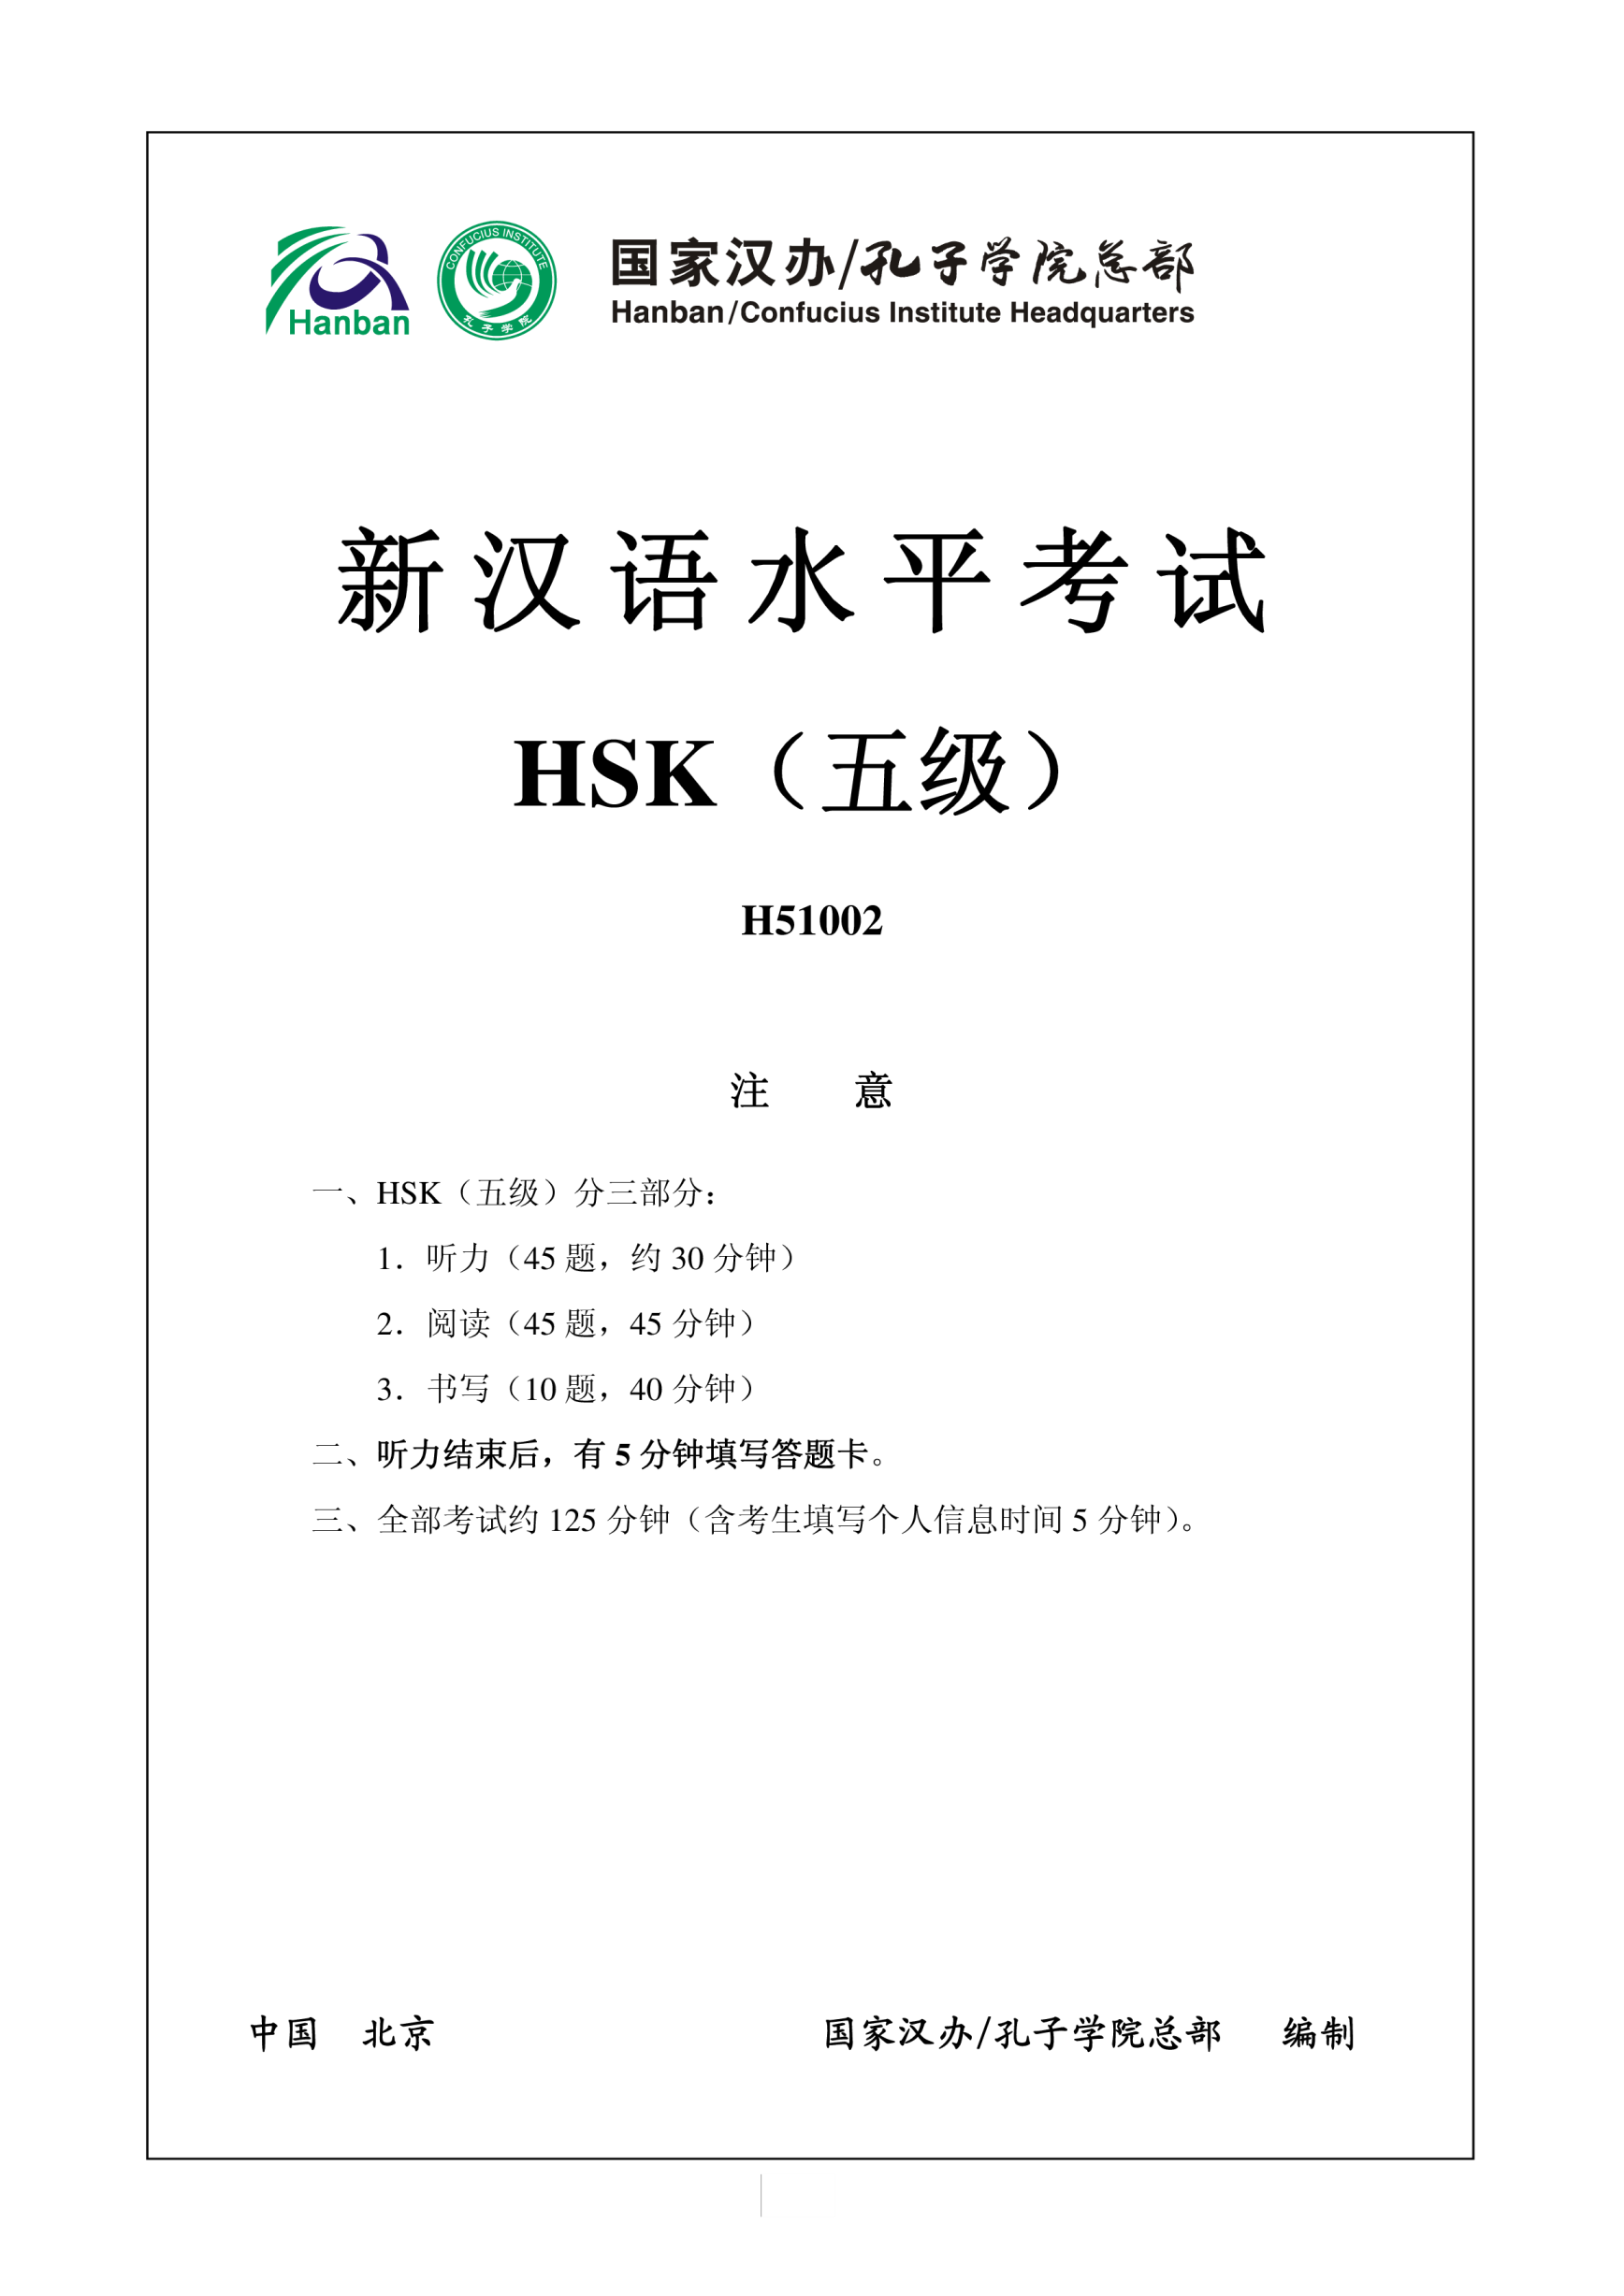 HSK5 H51002 Chinese Exam, including Audio and Answers gratis en premium templates